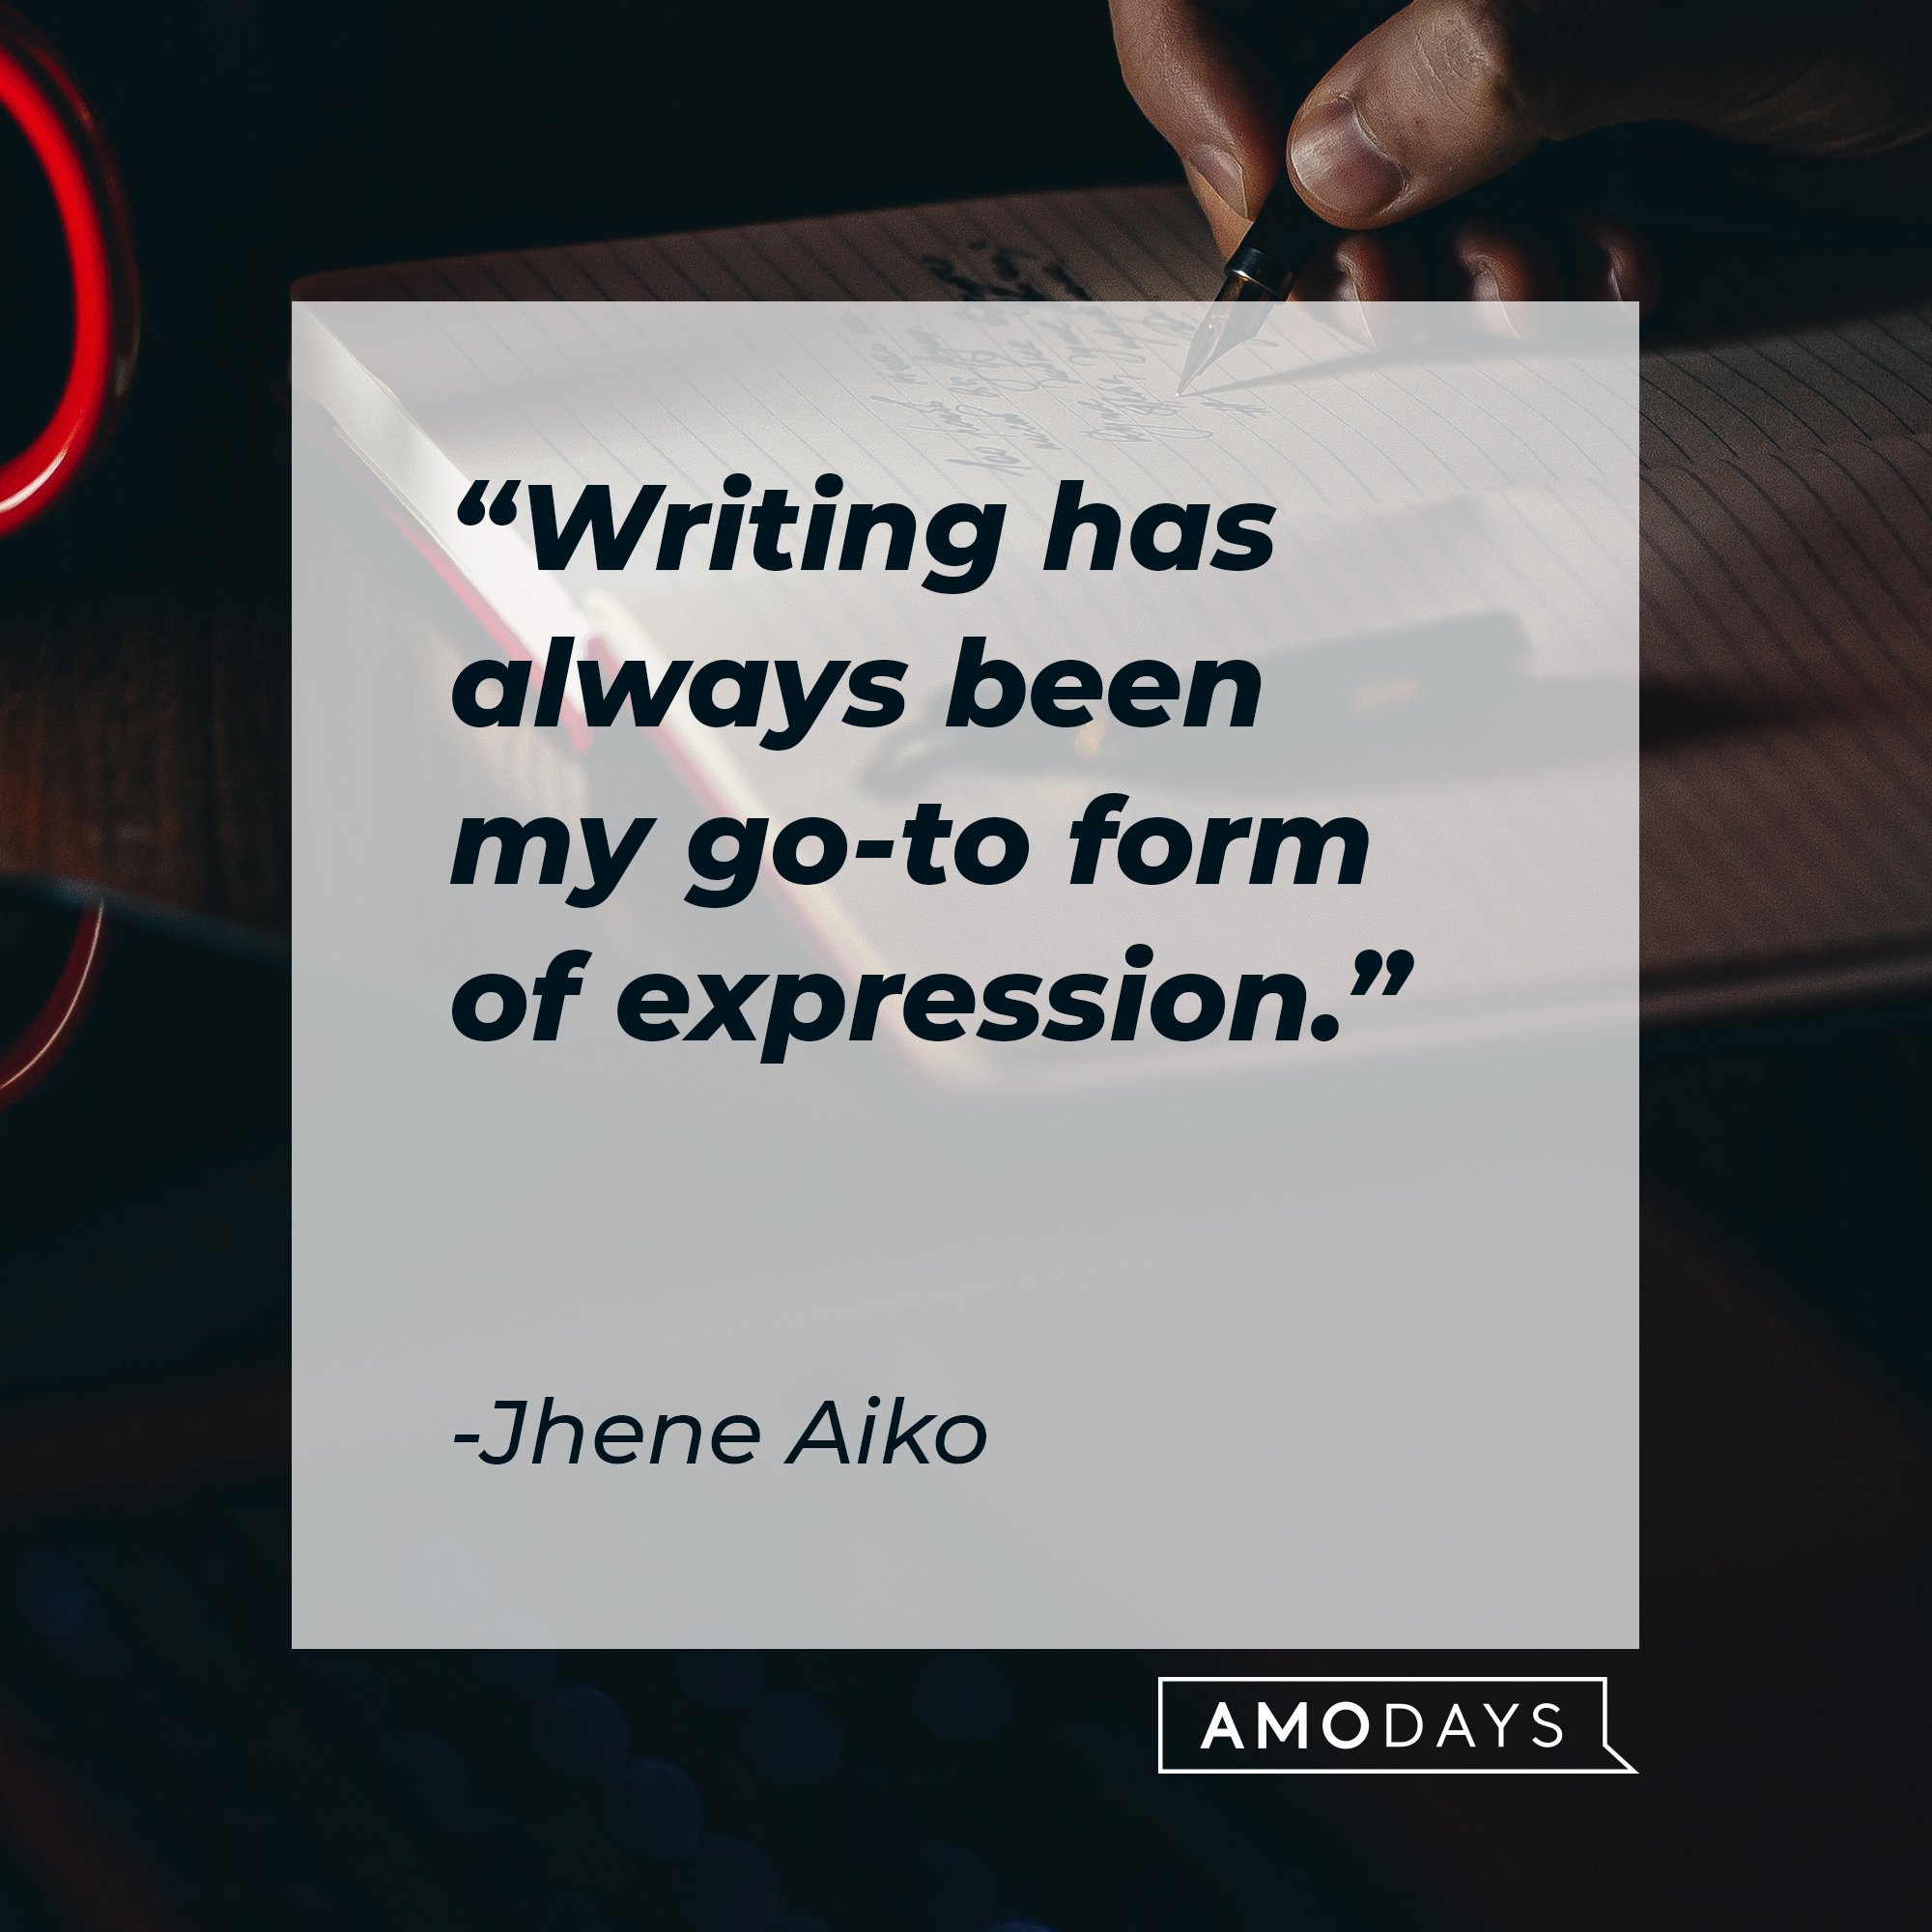  Jhene Aiko's quote: "Writing has always been my go-to form of expression." | Image: AmoDays